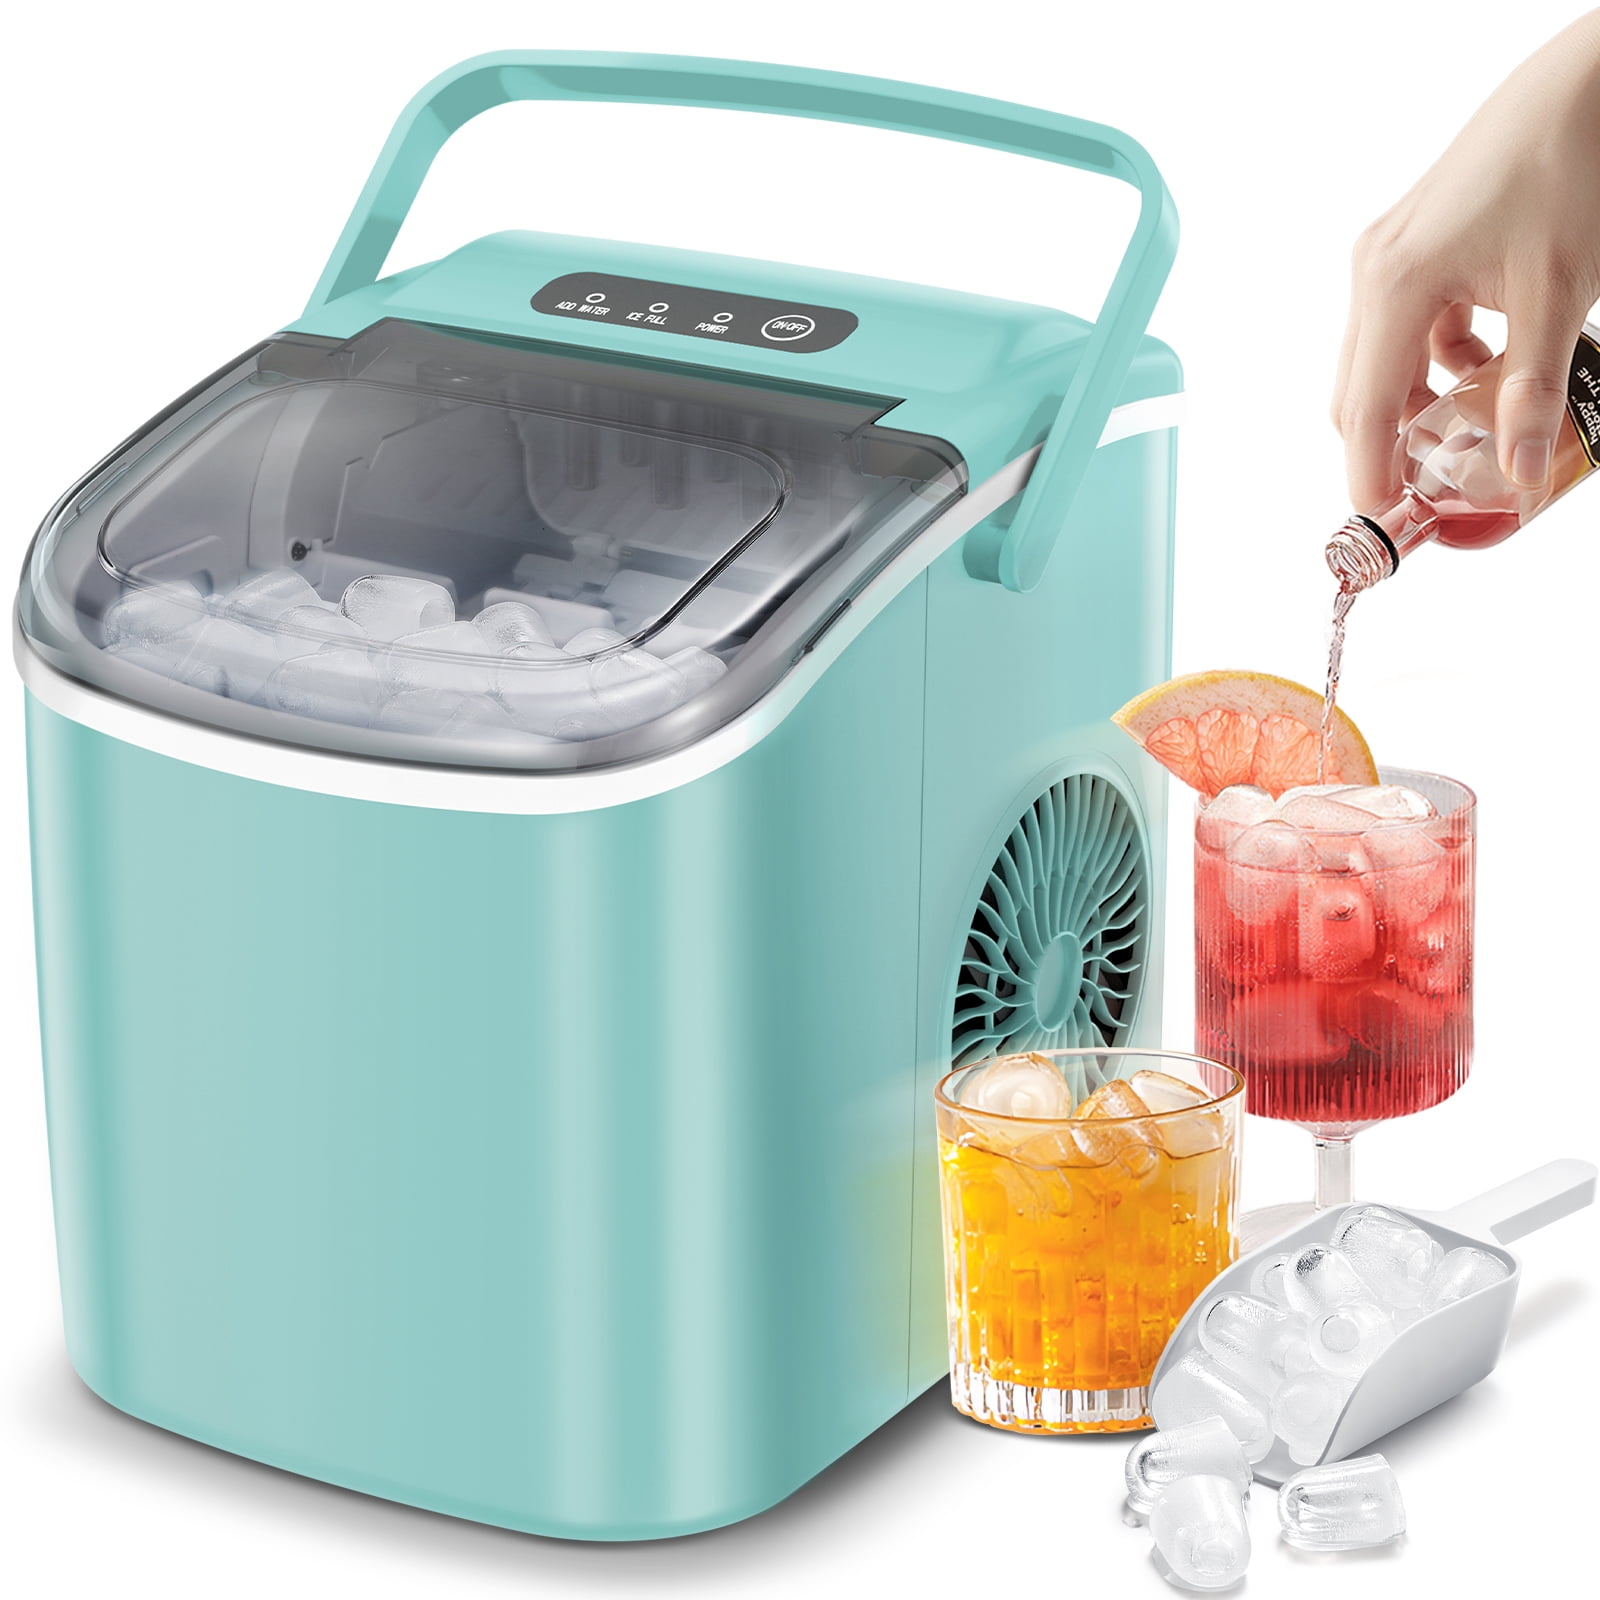 EUHOMY 34Lbs/24h Countertop Ice Maker Machine - Fully Flip Cover Cleaning,  2 Sizes Ice, 7 Mins 9 Bullet Ice, Portable Ice Maker with Basket and Scoop